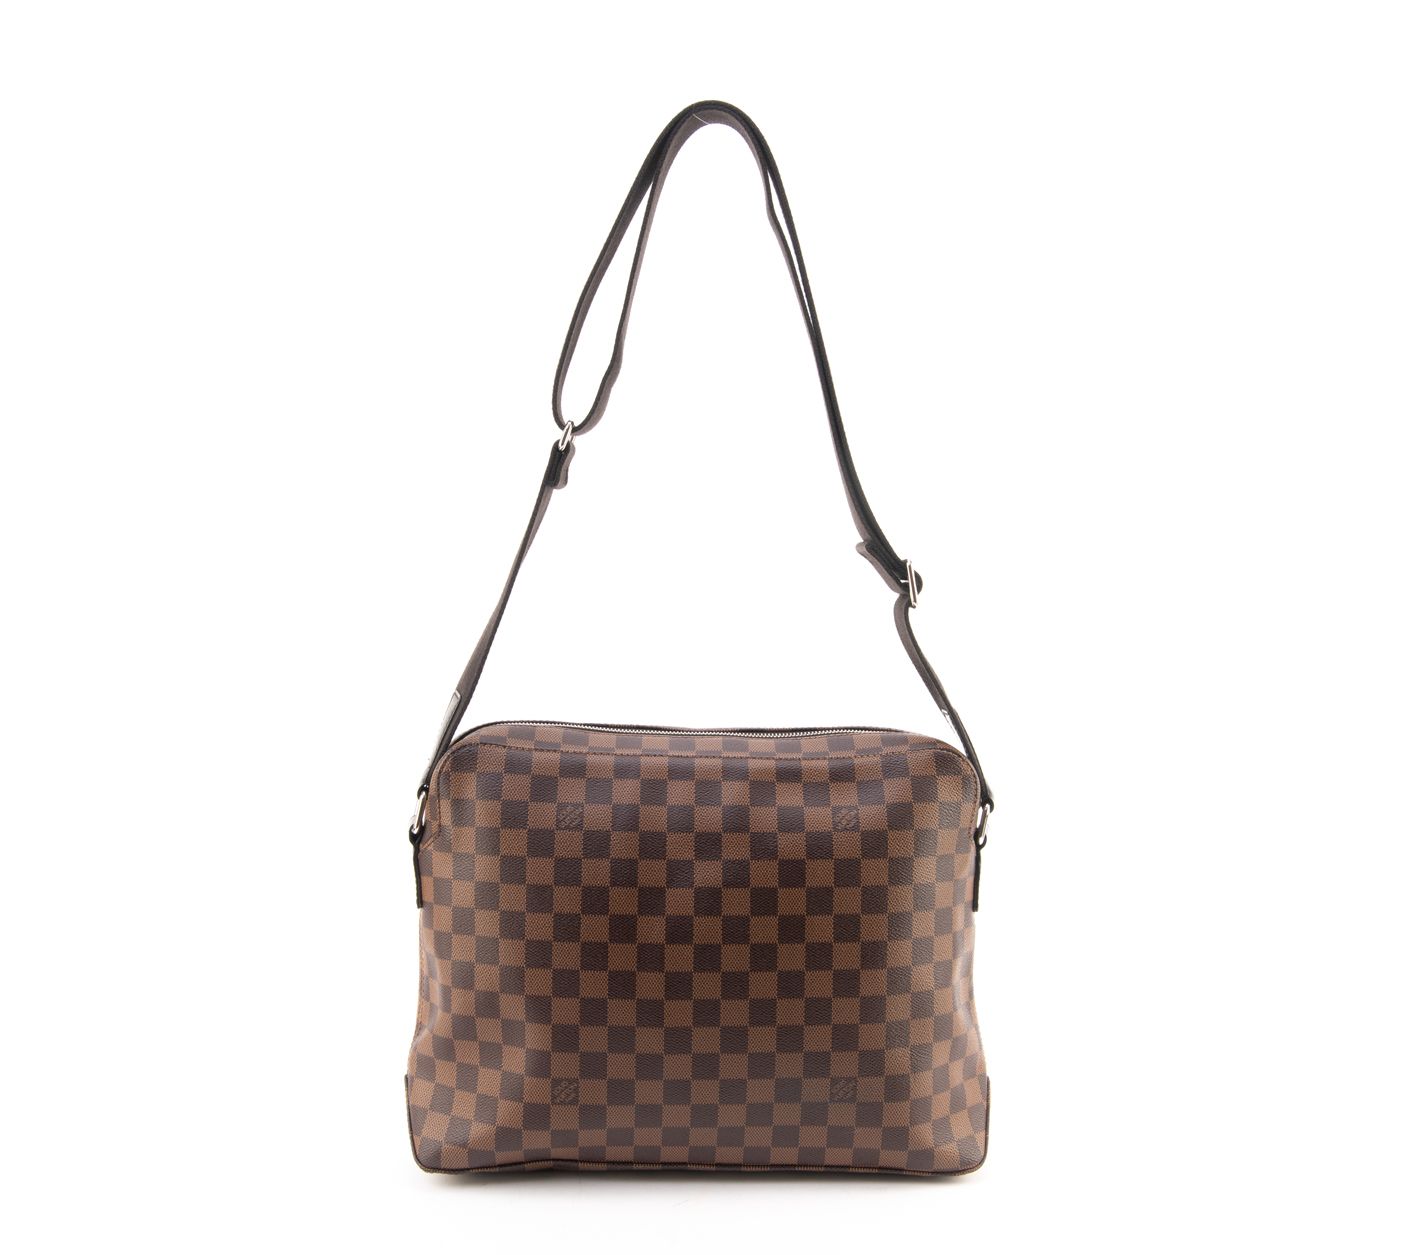 Don't Buy The Louis Vuitton Cite Bag Until You've Watched This Video 